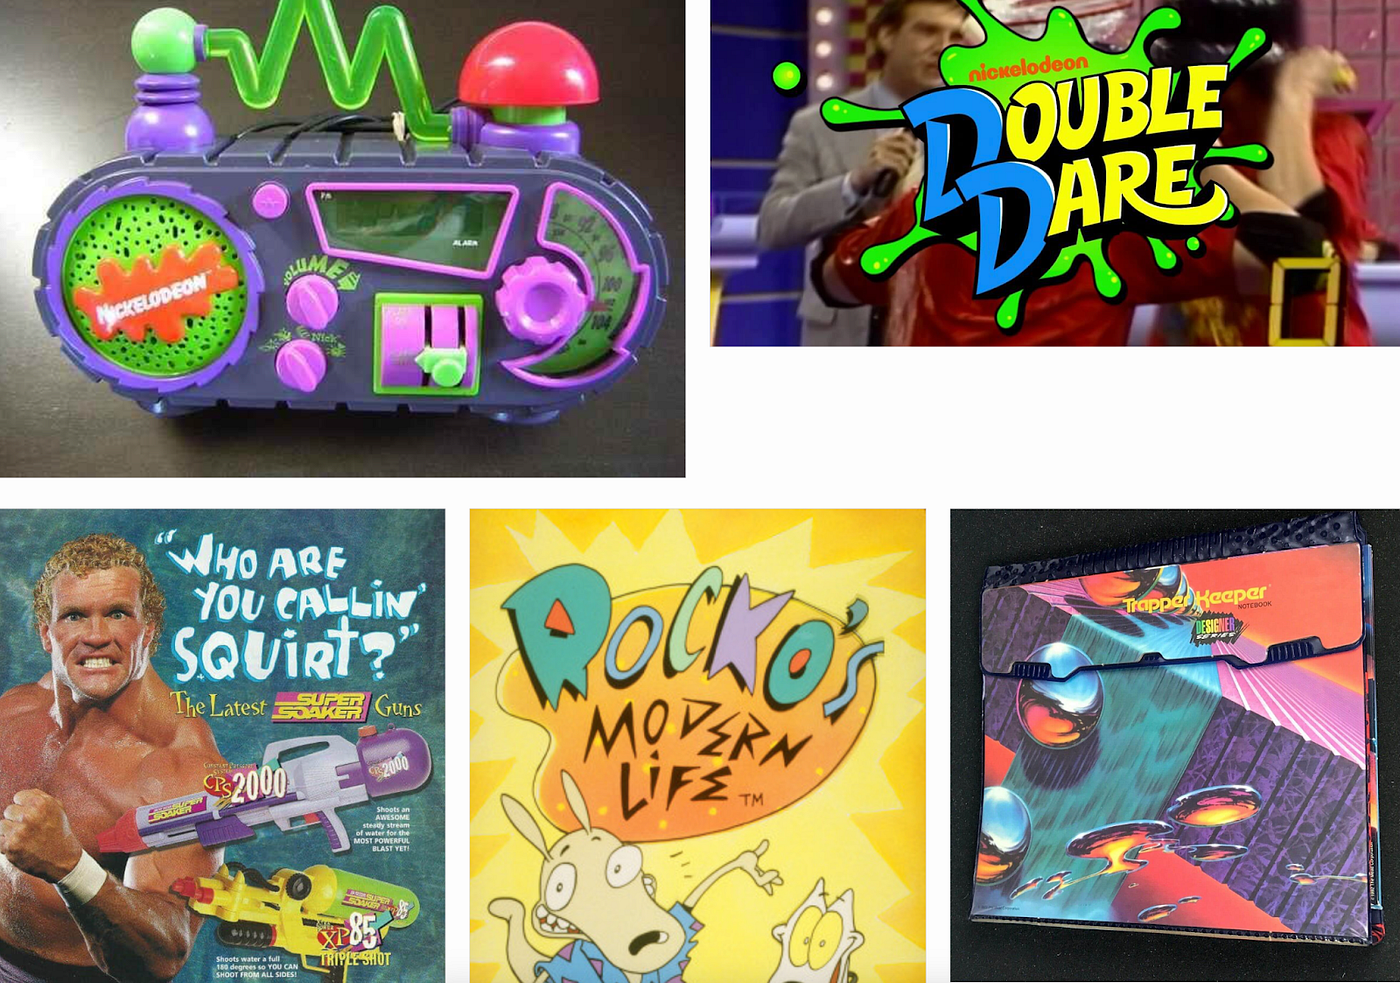 A collection of Miscellaneous ’90s vibe inspiration objects. Including Roccos modern life and Double Dare logos.